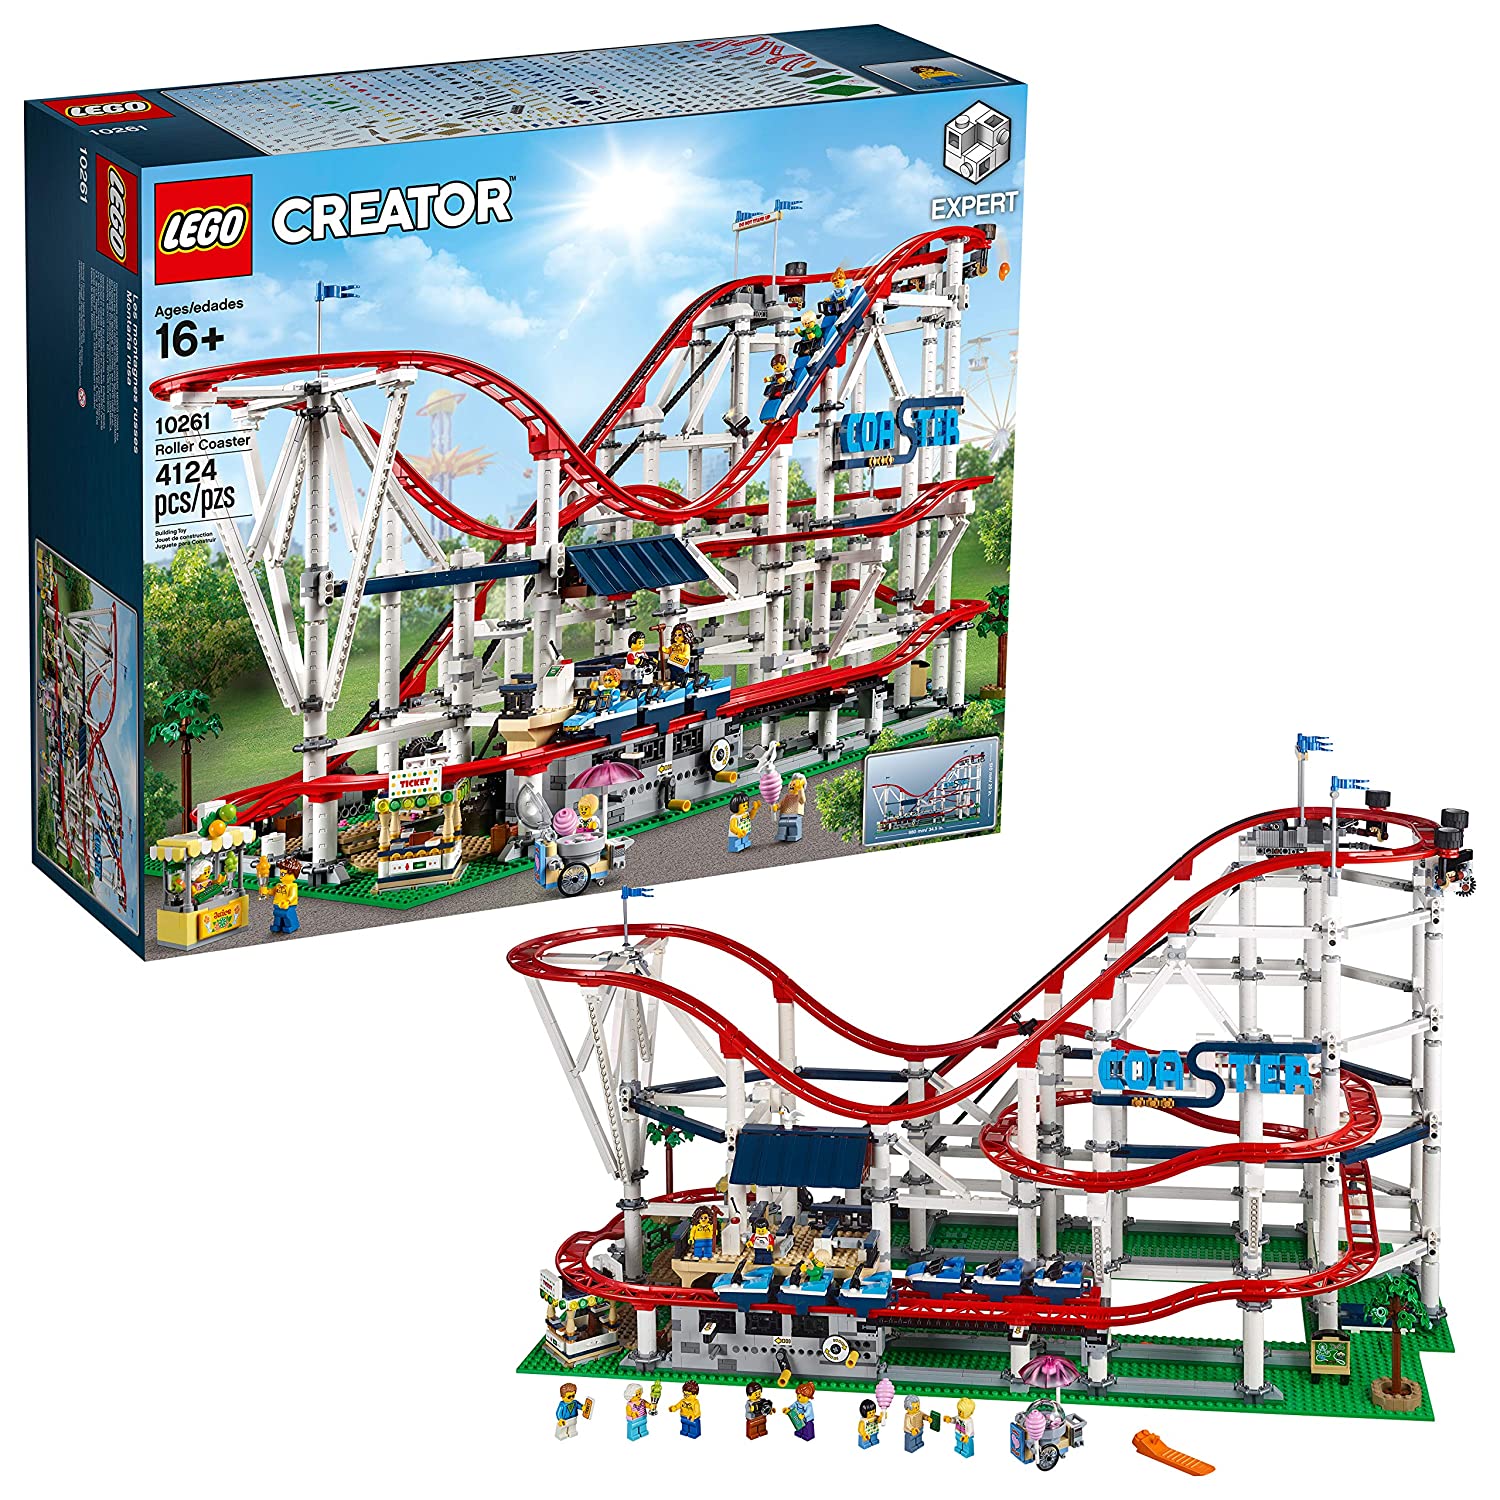 Top 5 Best Lego Roller Coaster Reviews in 2022 1